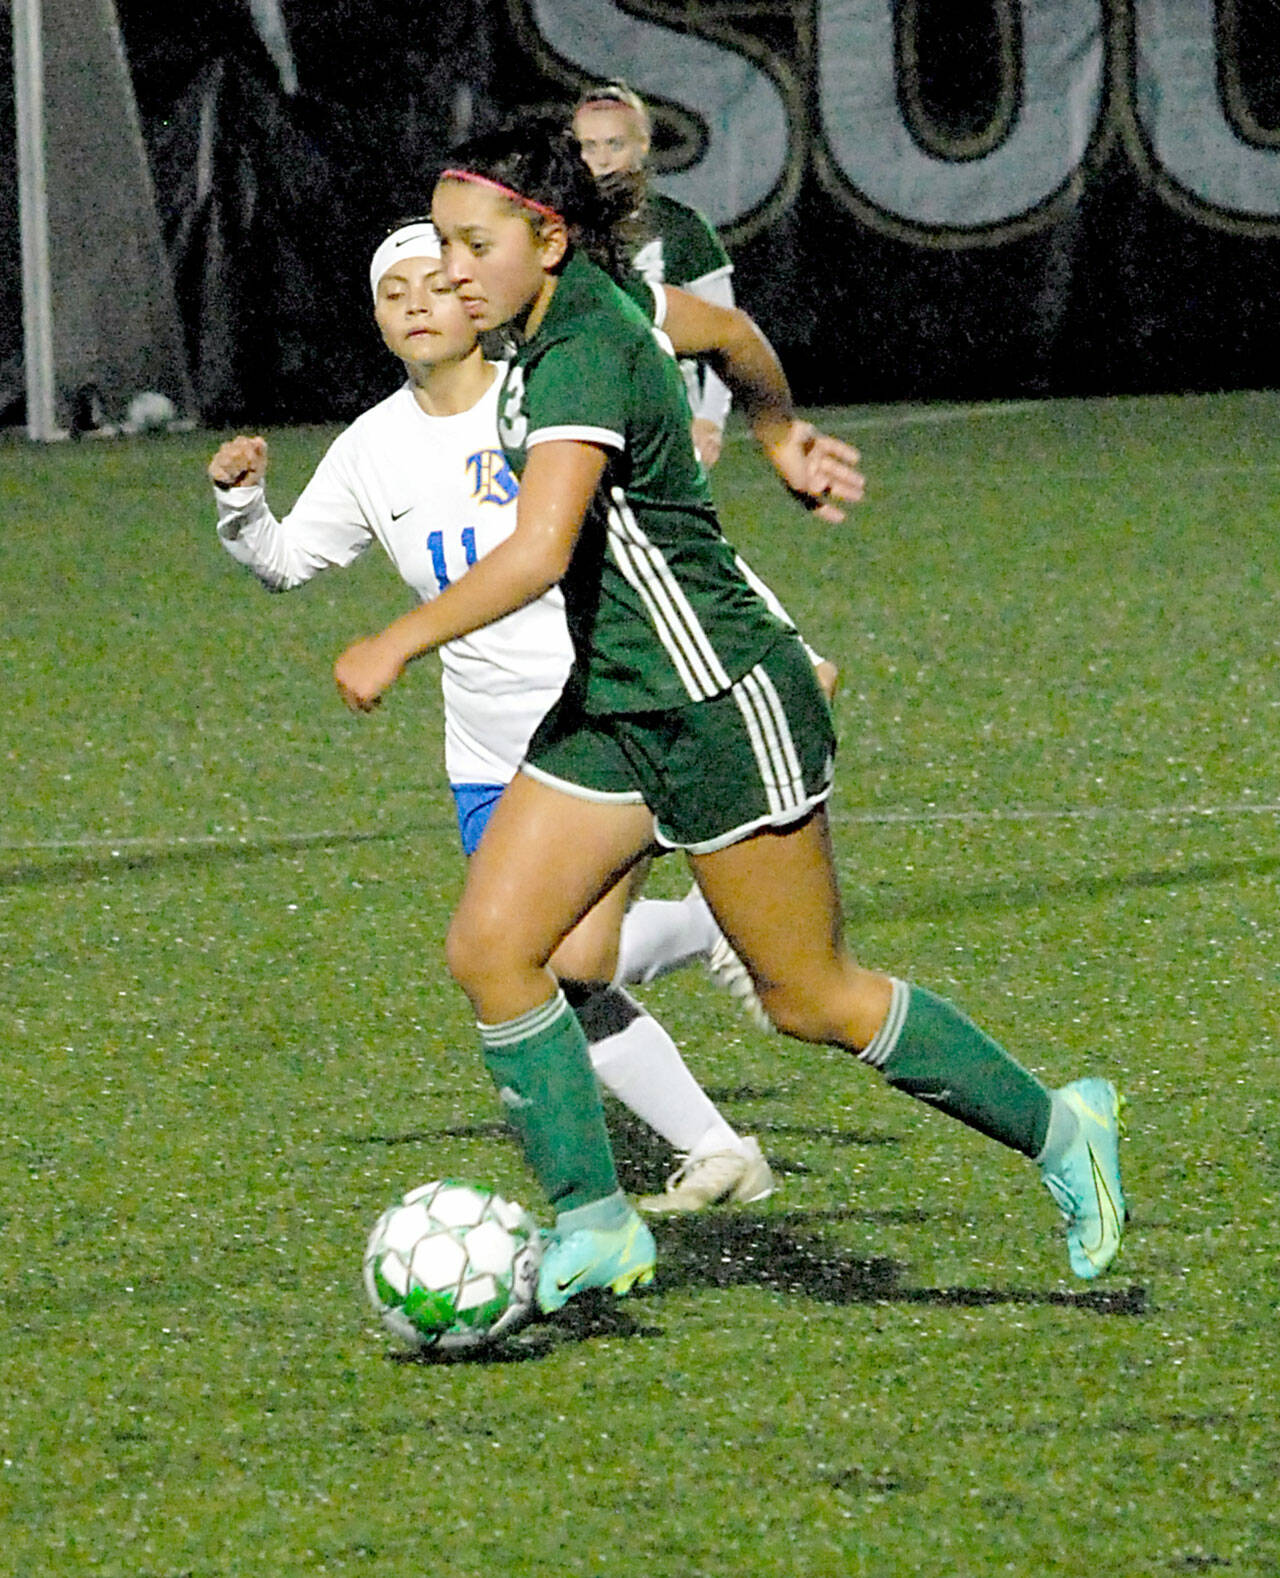 Keith Thorpe/Peninsula Daily News Port Angeles’ Lily Sanders, right, slips past Bremerton’s Marisol Popoca-Pablo on Thursday night in Port Angeles.